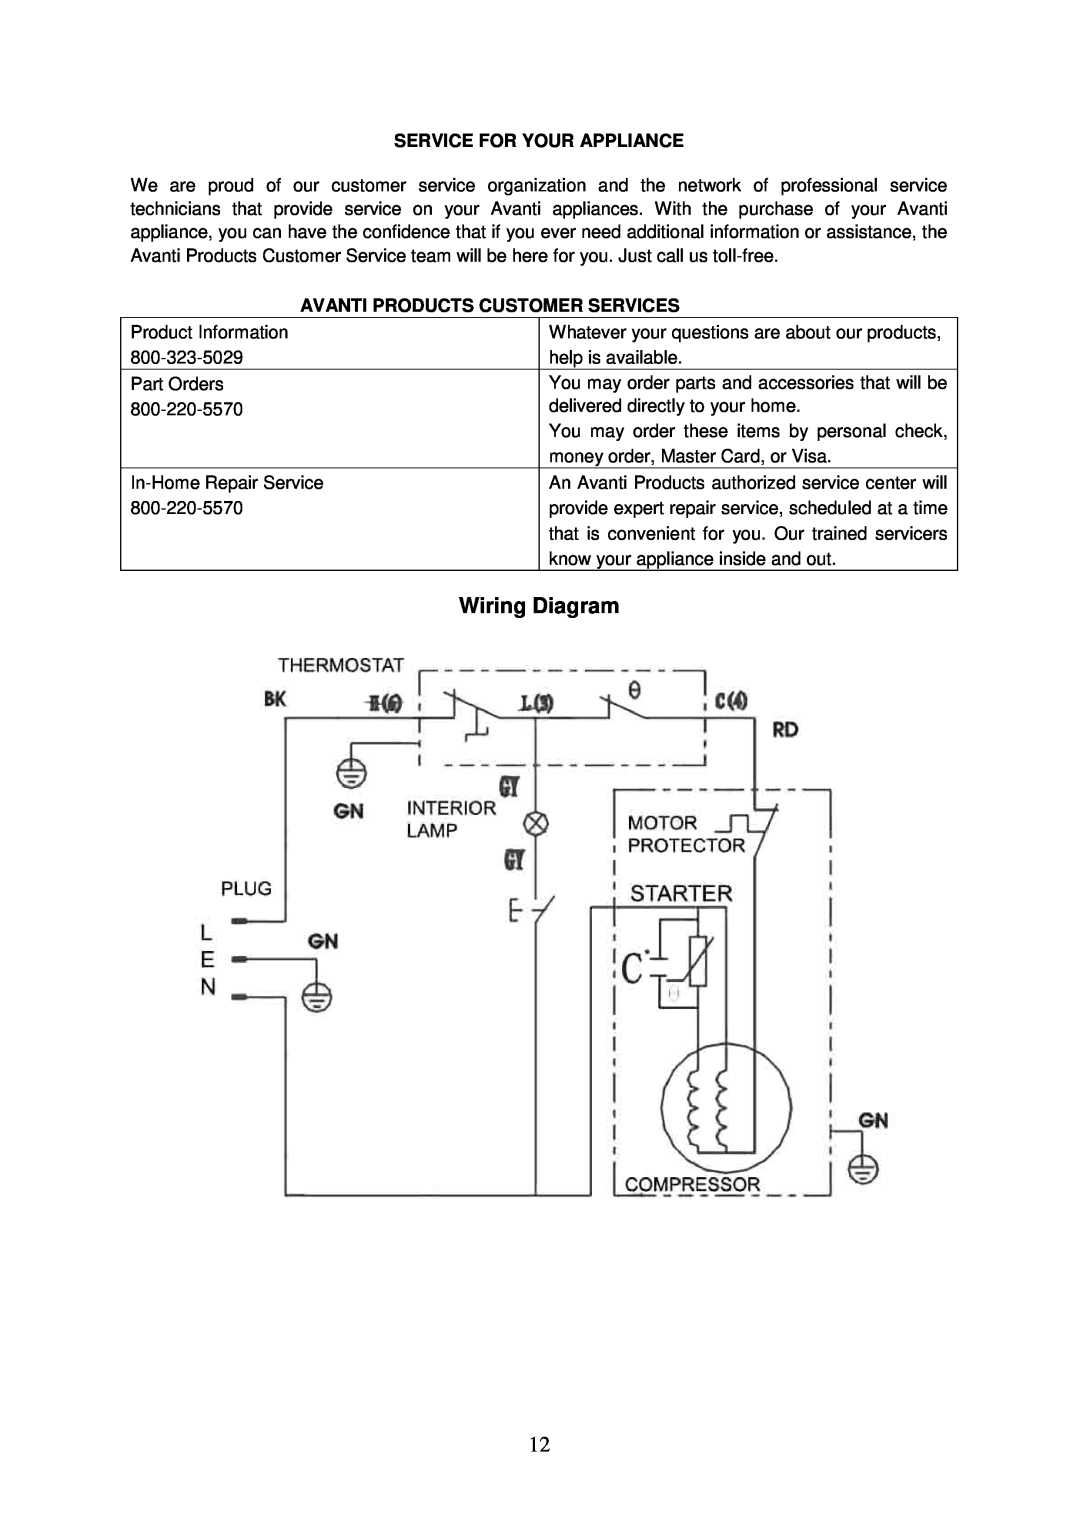 Avanti RA752PST, RA751WT instruction manual Wiring Diagram, Service For Your Appliance, Avanti Products Customer Services 